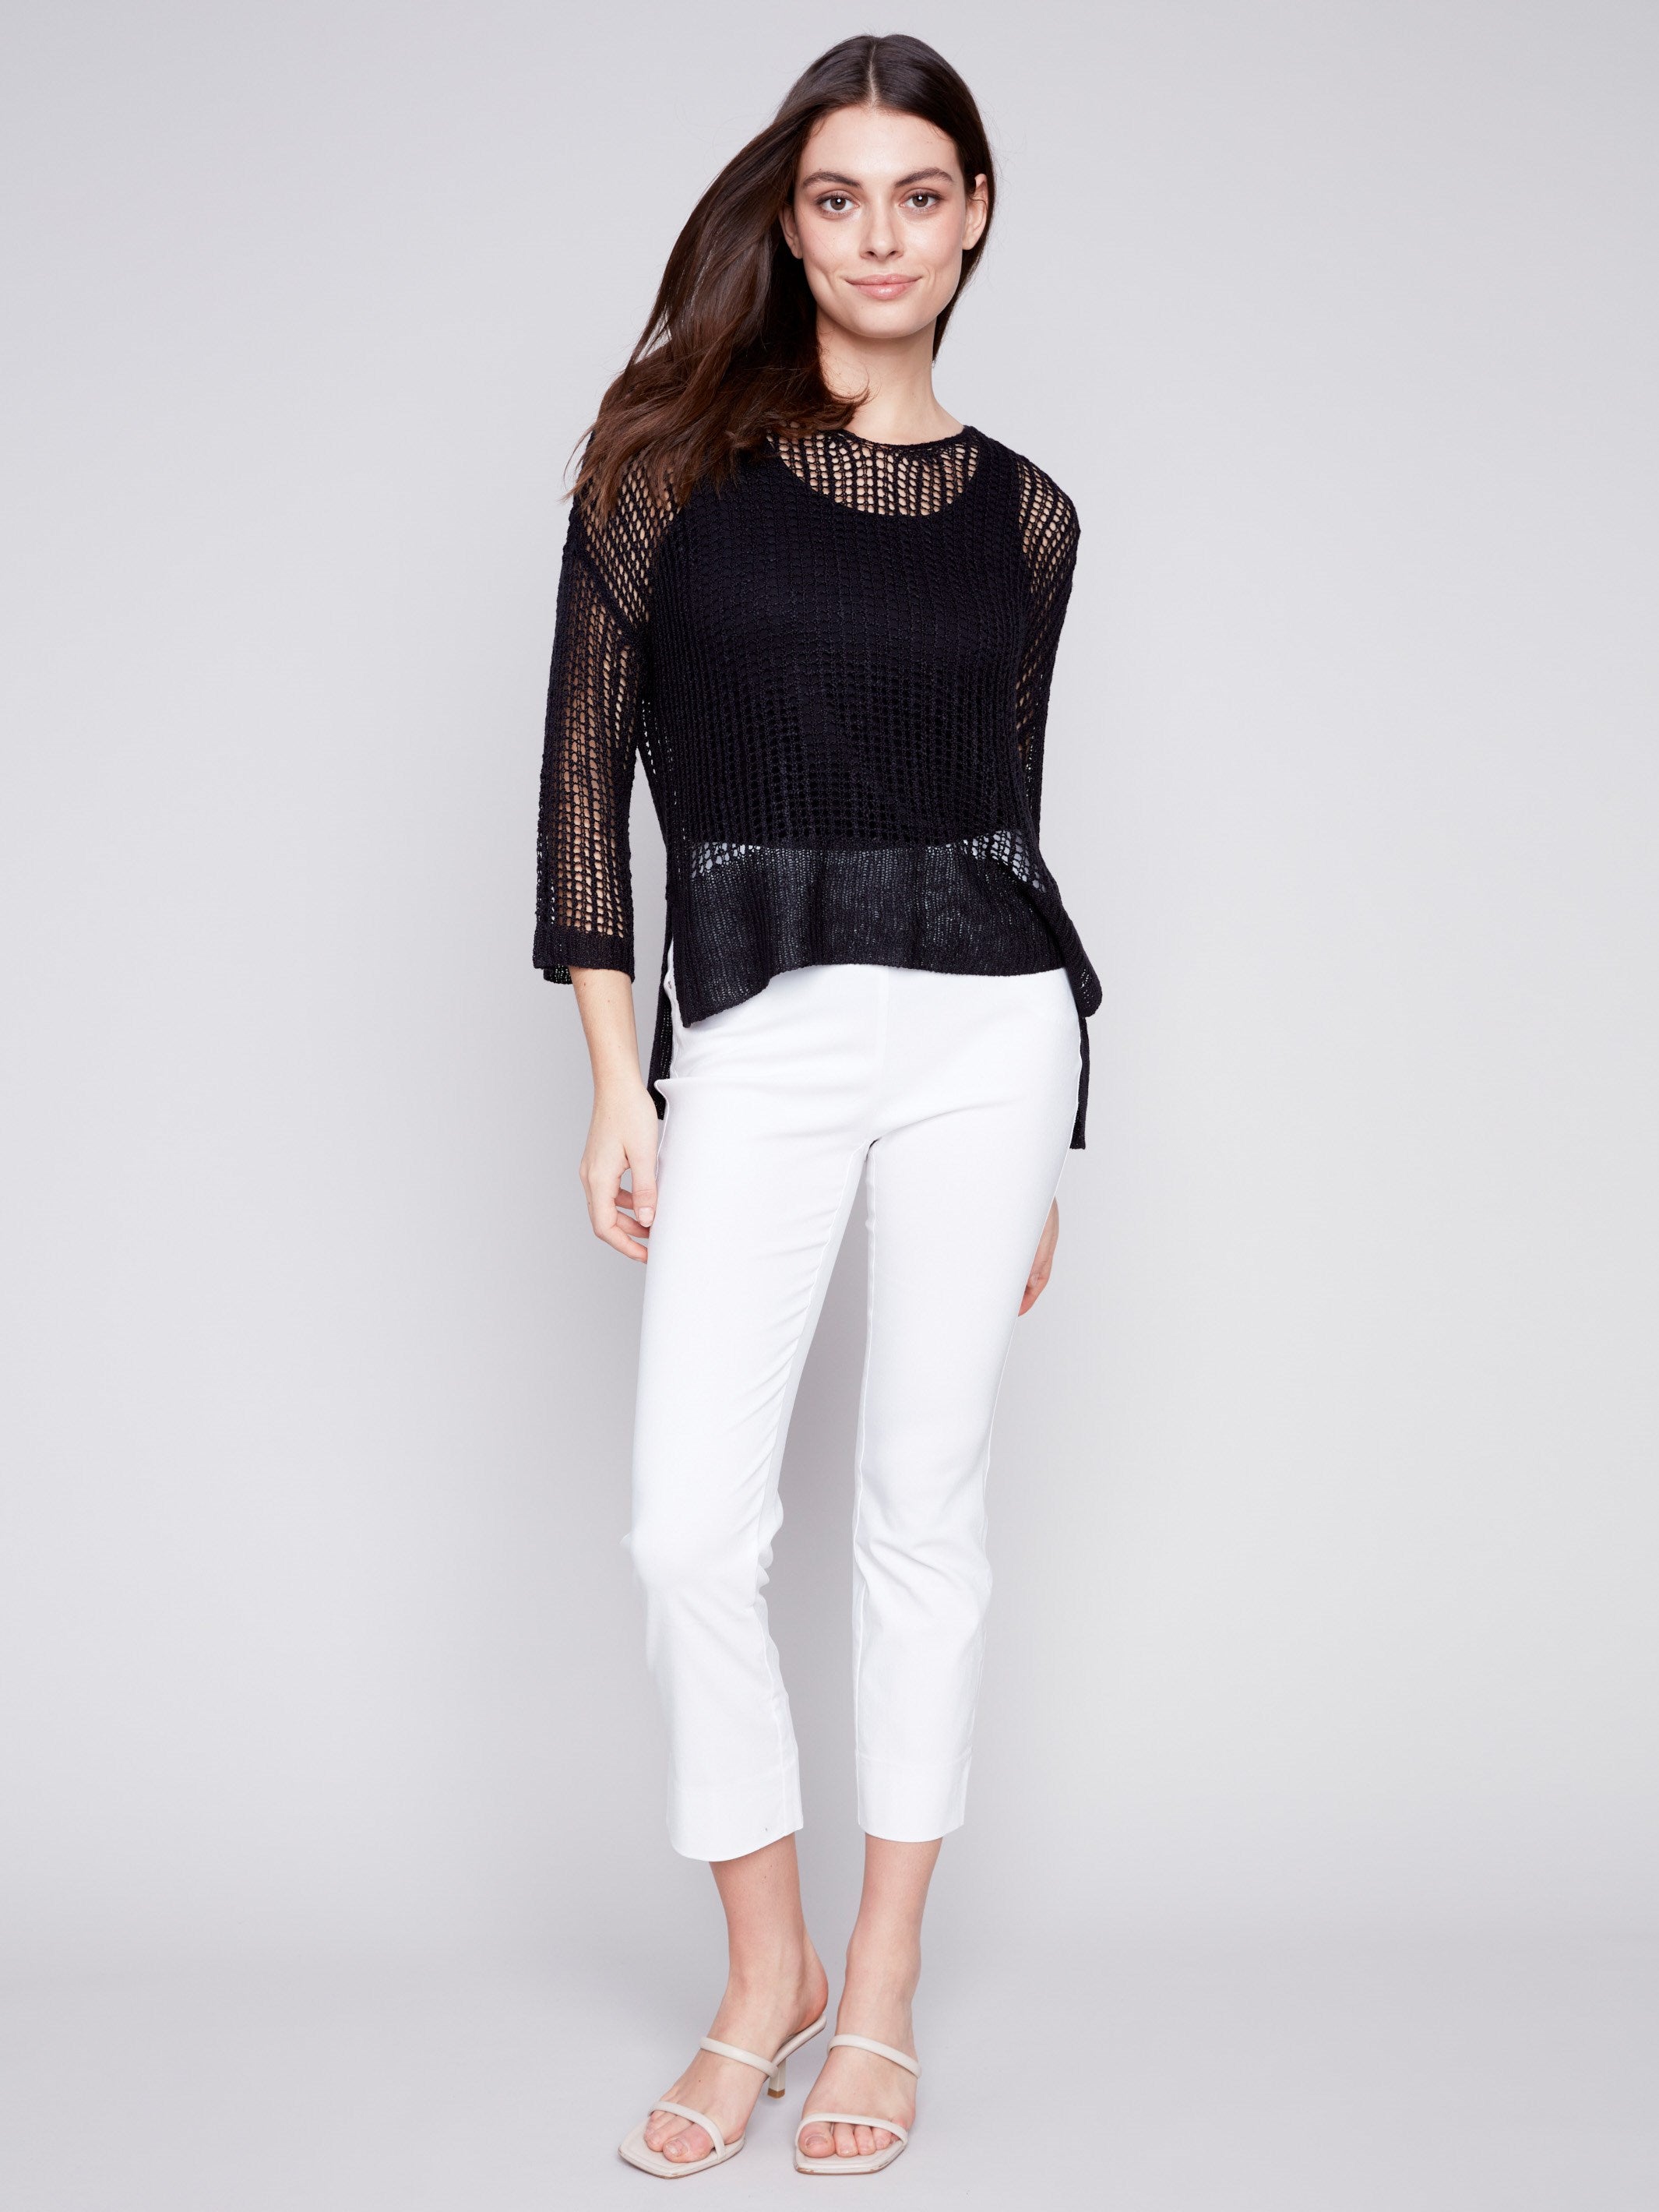 Fishnet Crochet Sweater - Black - Charlie B Collection Canada - Image 3